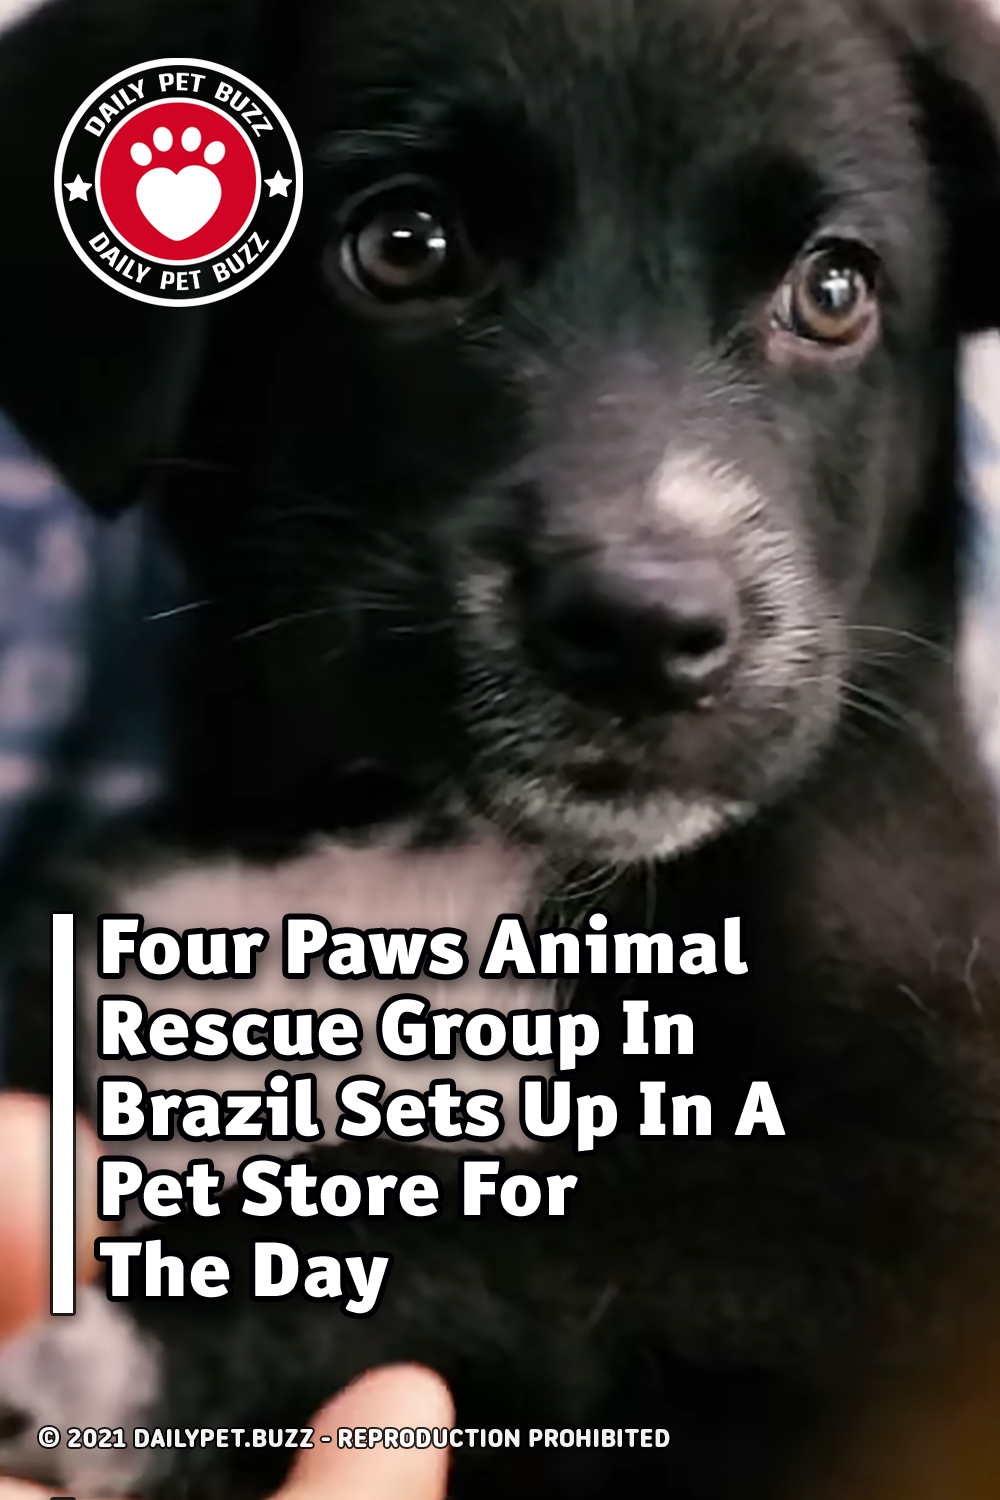 Four Paws Animal Rescue Group In Brazil Sets Up In A Pet Store For The Day